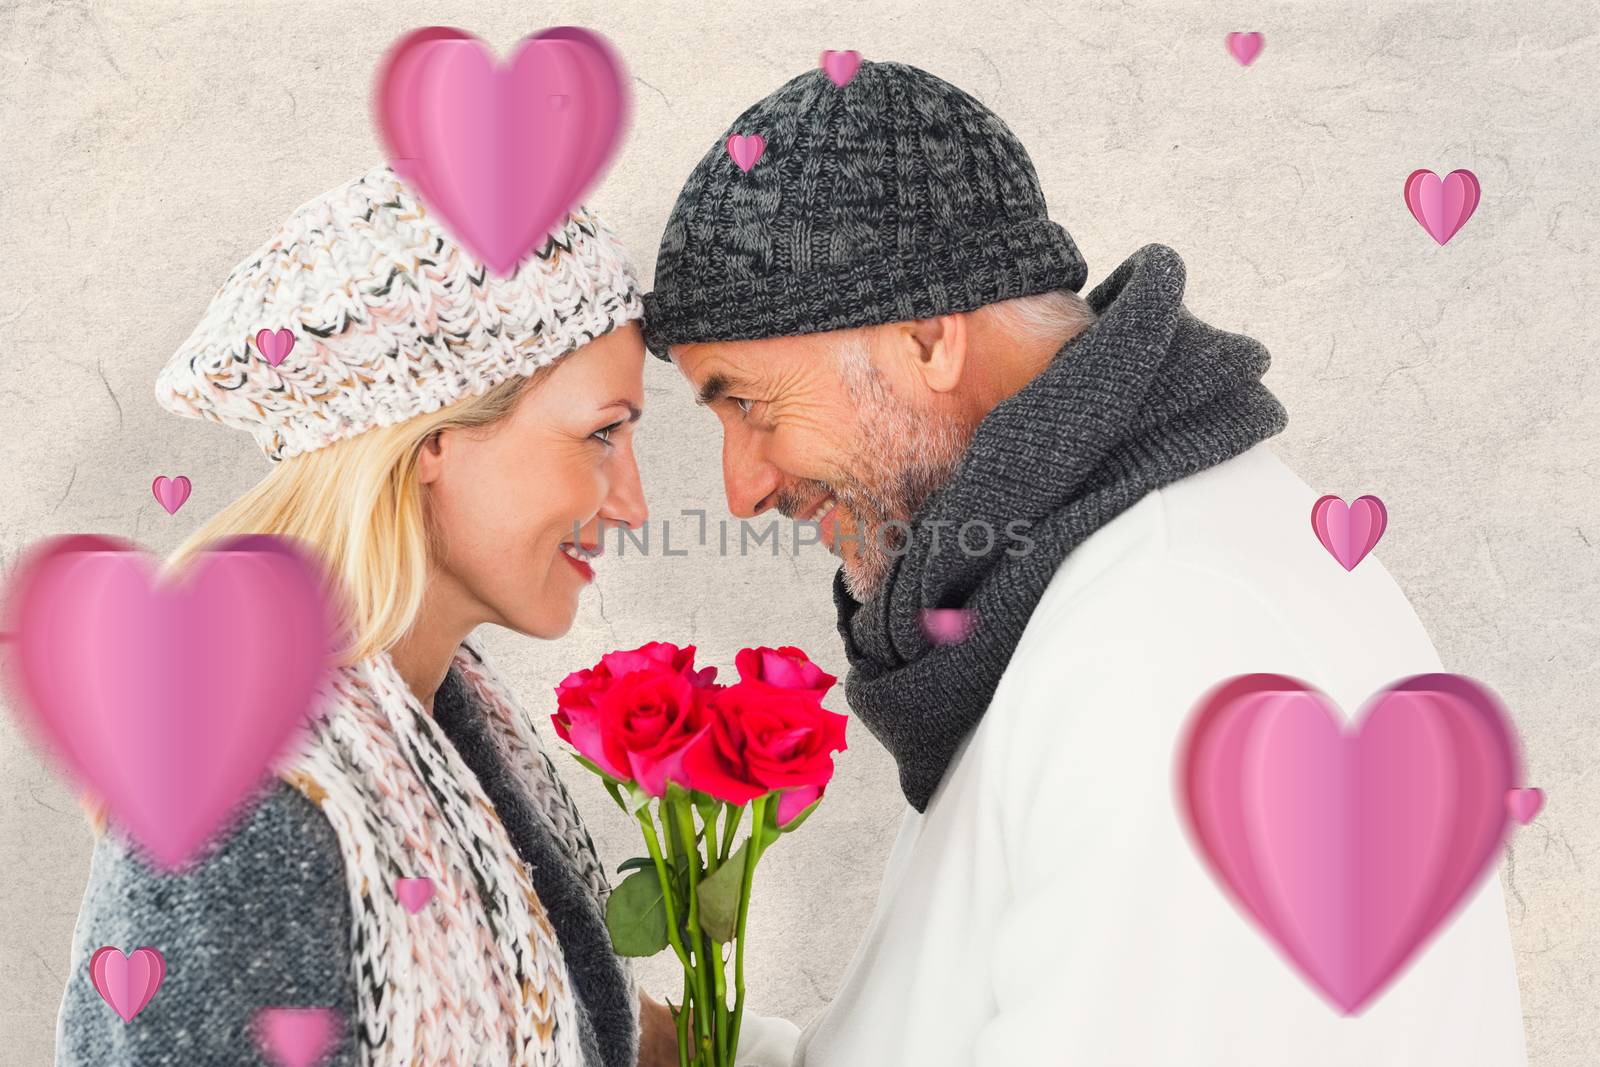 Composite image of smiling couple in winter fashion posing with roses by Wavebreakmedia